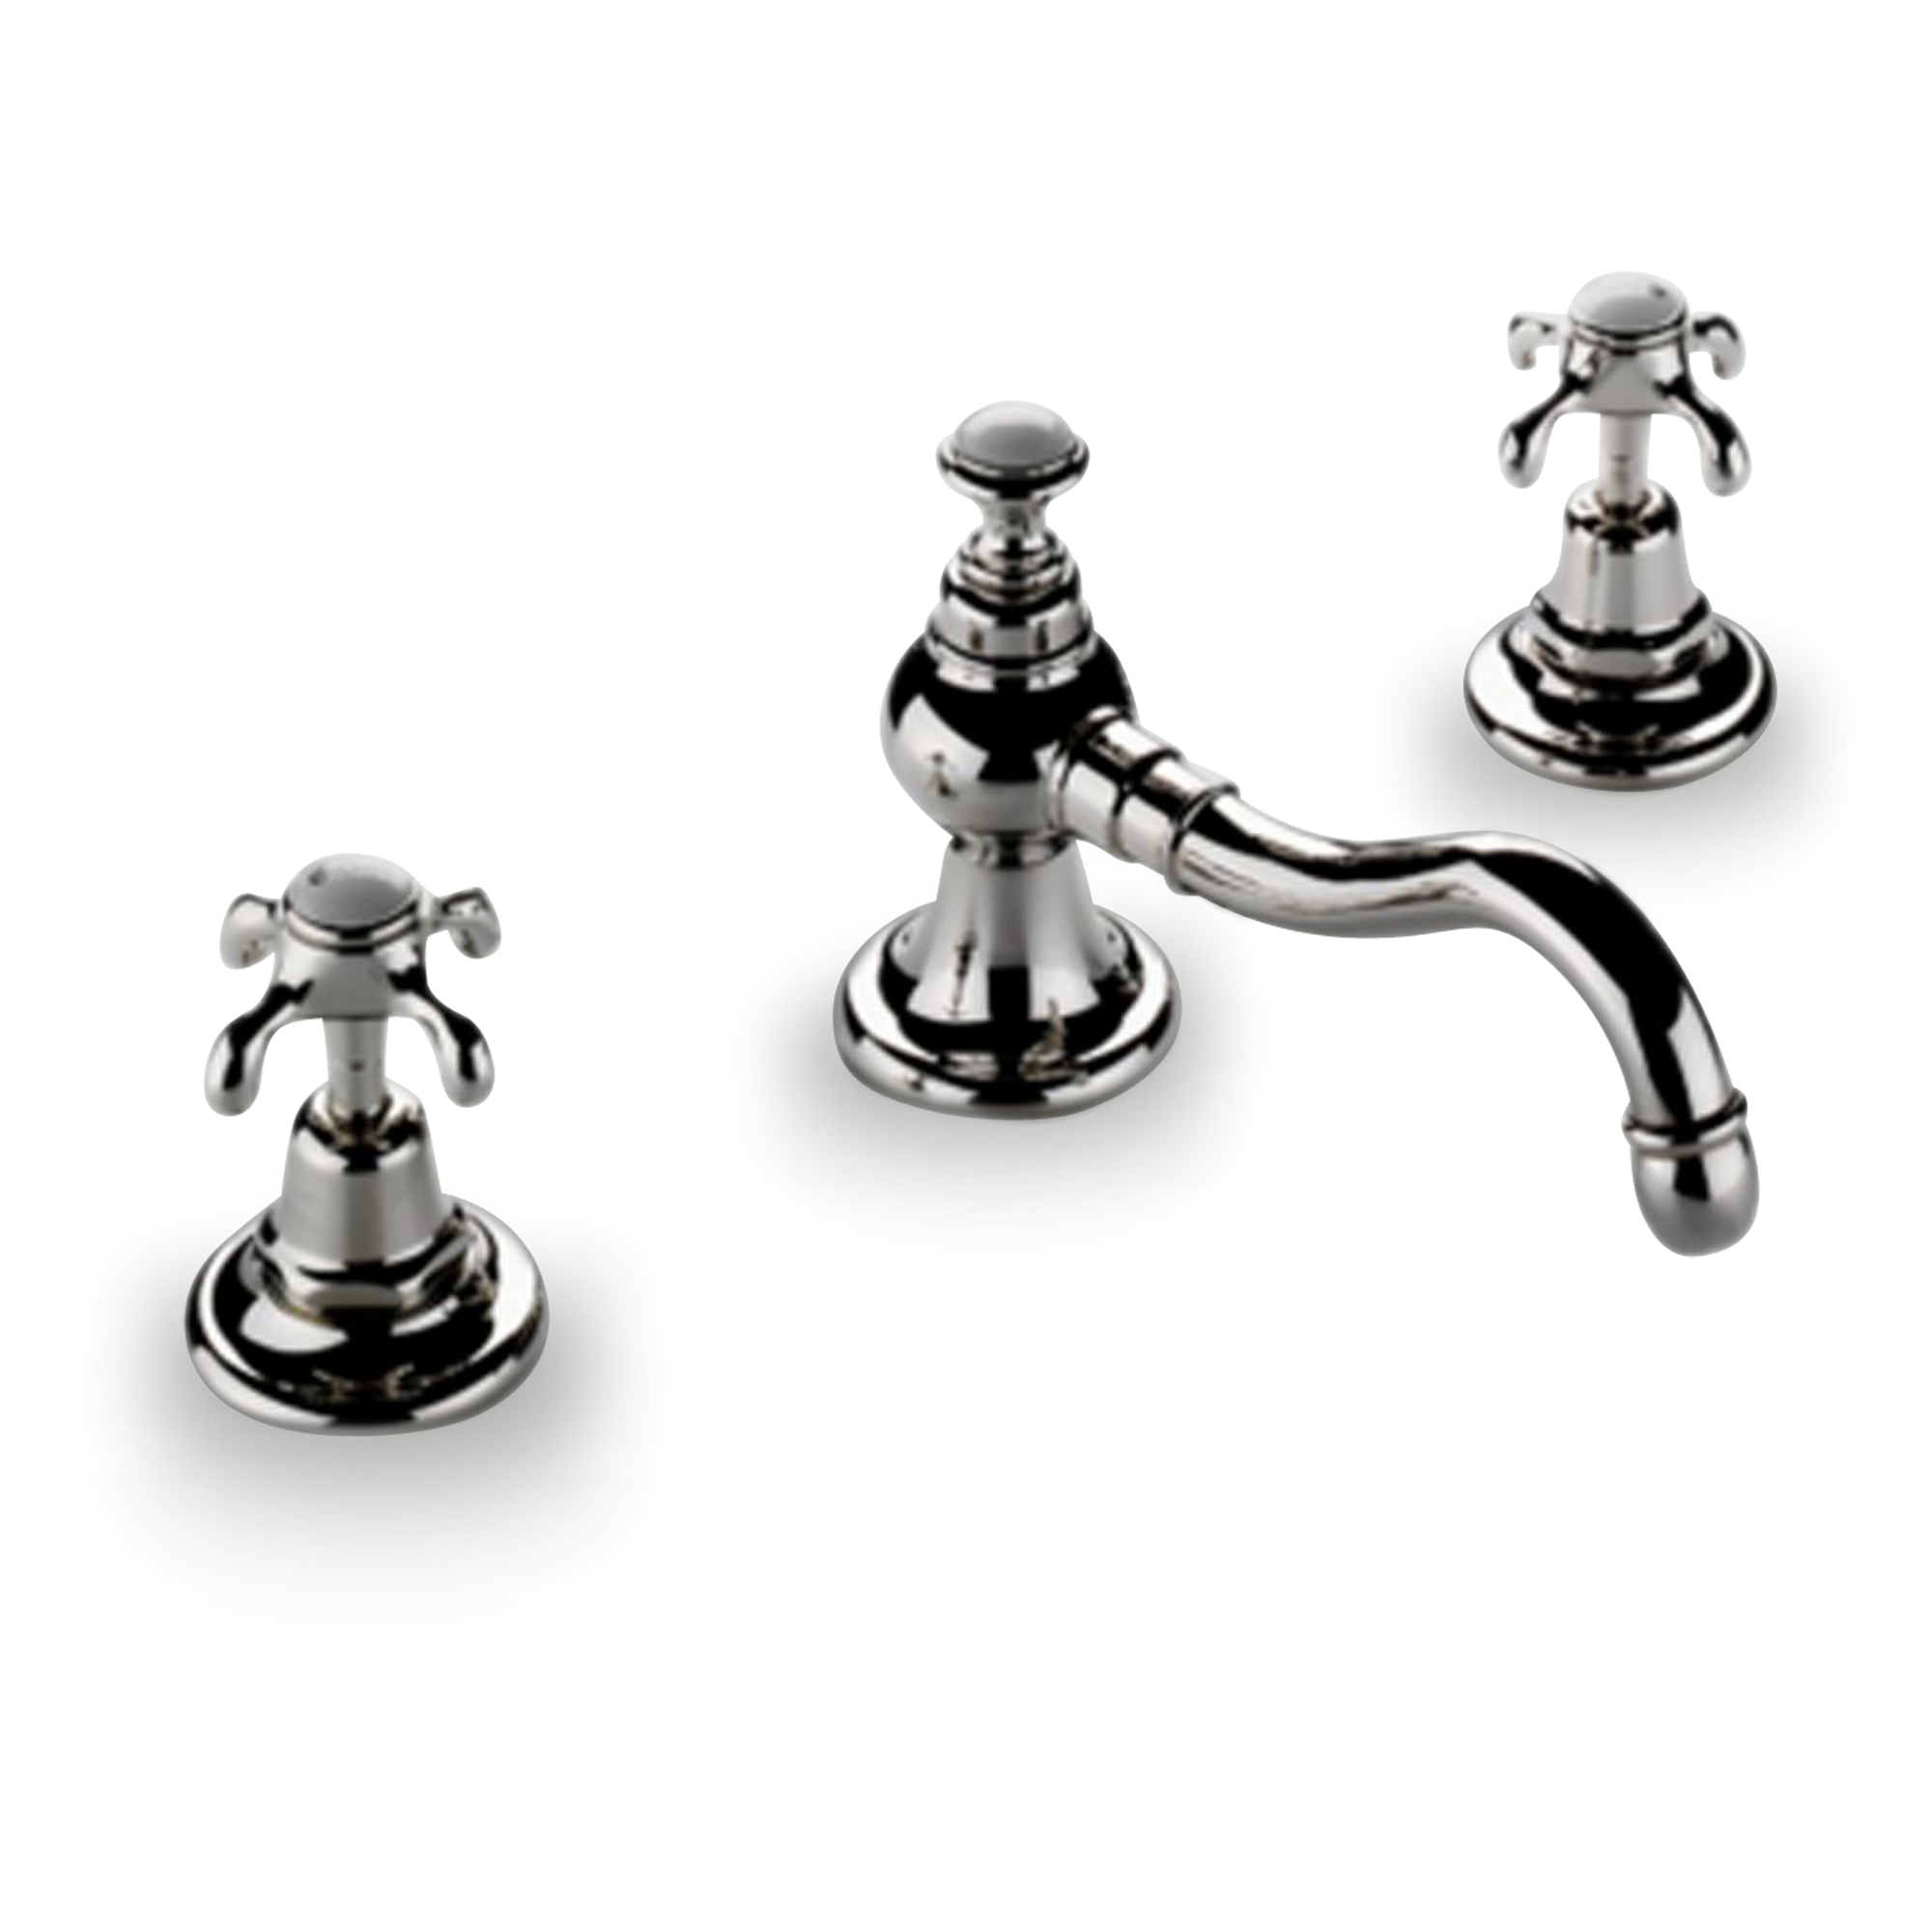 A traditional widespread faucet with dew-drop cross handles.